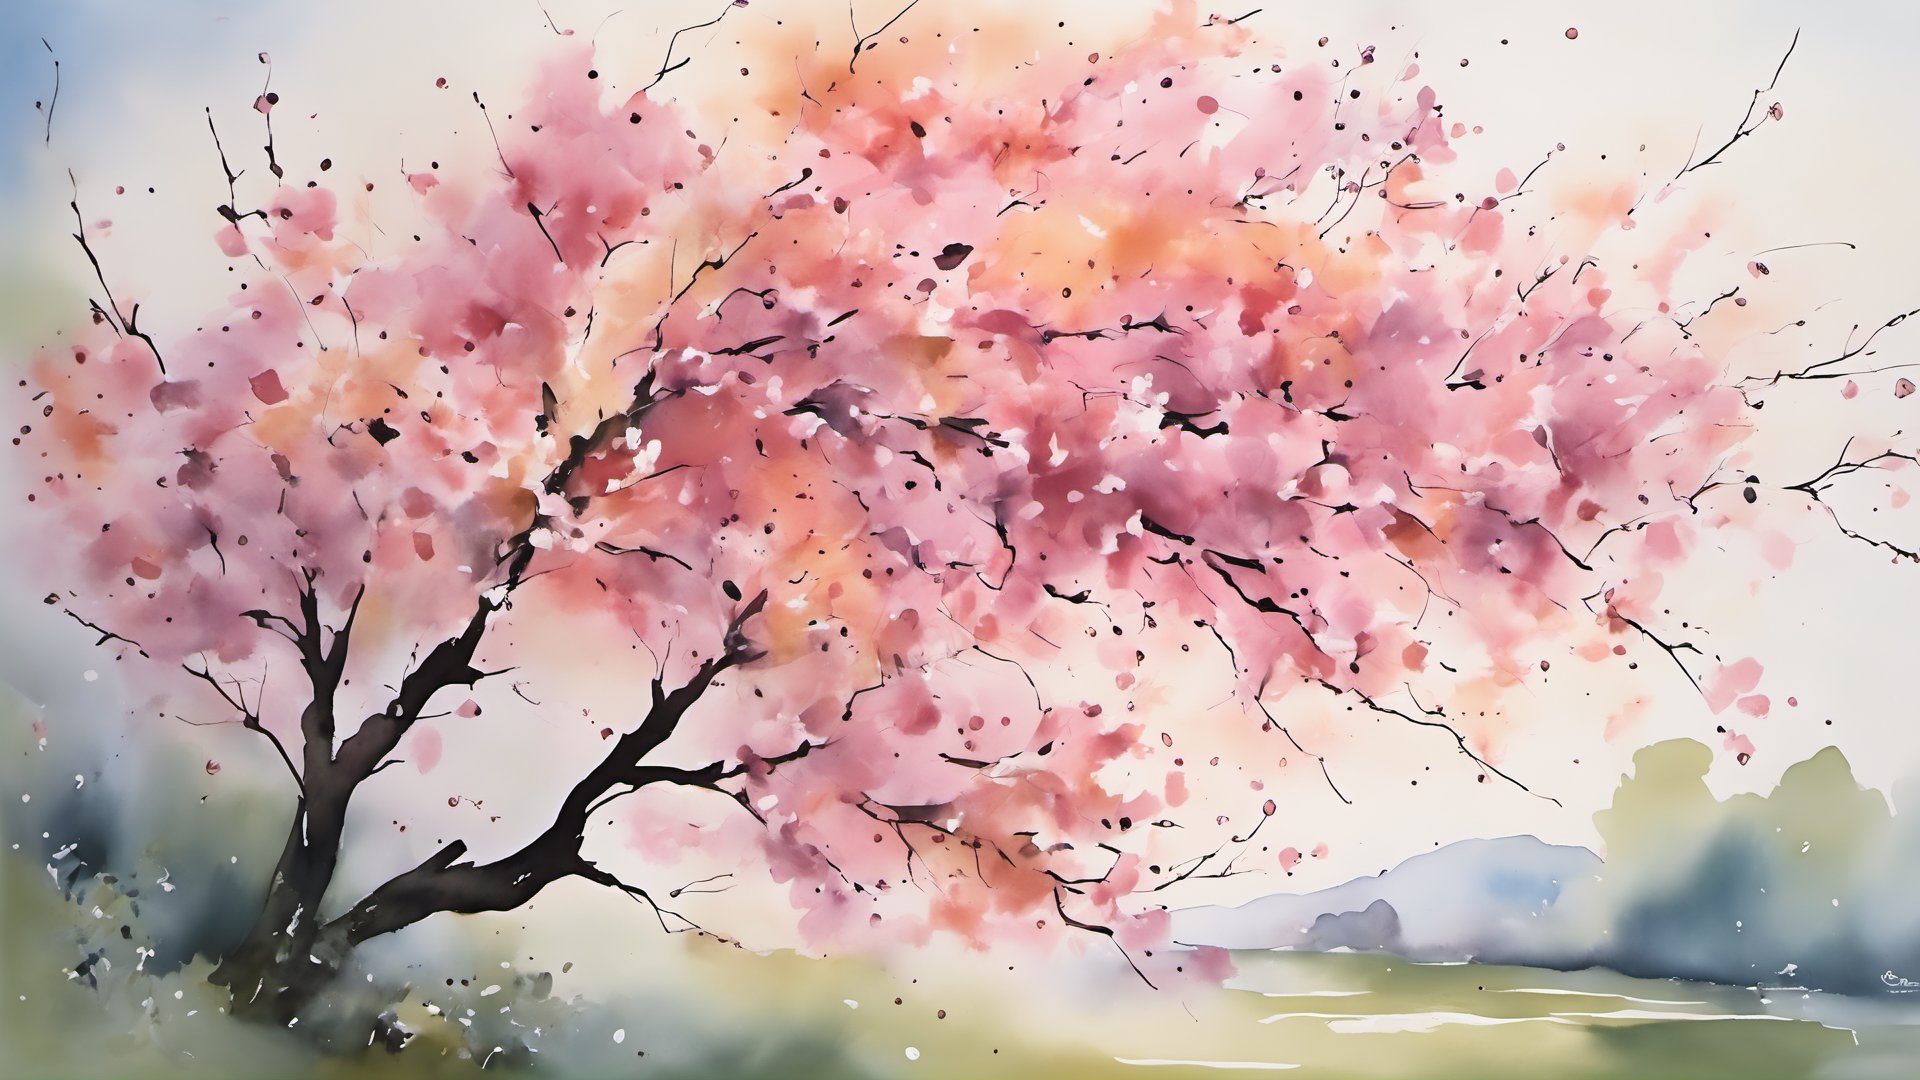 In this watercolor masterpiece, the canvas bursts to life with the ethereal beauty of cherry blossoms in full bloom. Delicate pastel tones dominate, evoking a sense of softness and tranquility. Each petal is meticulously rendered, its hues ranging from creamy whites to blush pinks and gentle lavenders, creating a mesmerizing symphony of color. The wide-angle composition captures the sprawling canopy of blossoms, with petals delicately drifting on the breeze like confetti, imbuing the scene with a sense of fleeting joy. Against a backdrop of subtle gradients, the sakura branches twist and intertwine, forming a captivating tableau of nature's splendor. This artwork celebrates the ephemeral elegance of springtime's most cherished spectacle.,ink<lora:EMS-335737-EMS:-0.500000>, <lora:EMS-338216-EMS:-0.500000>